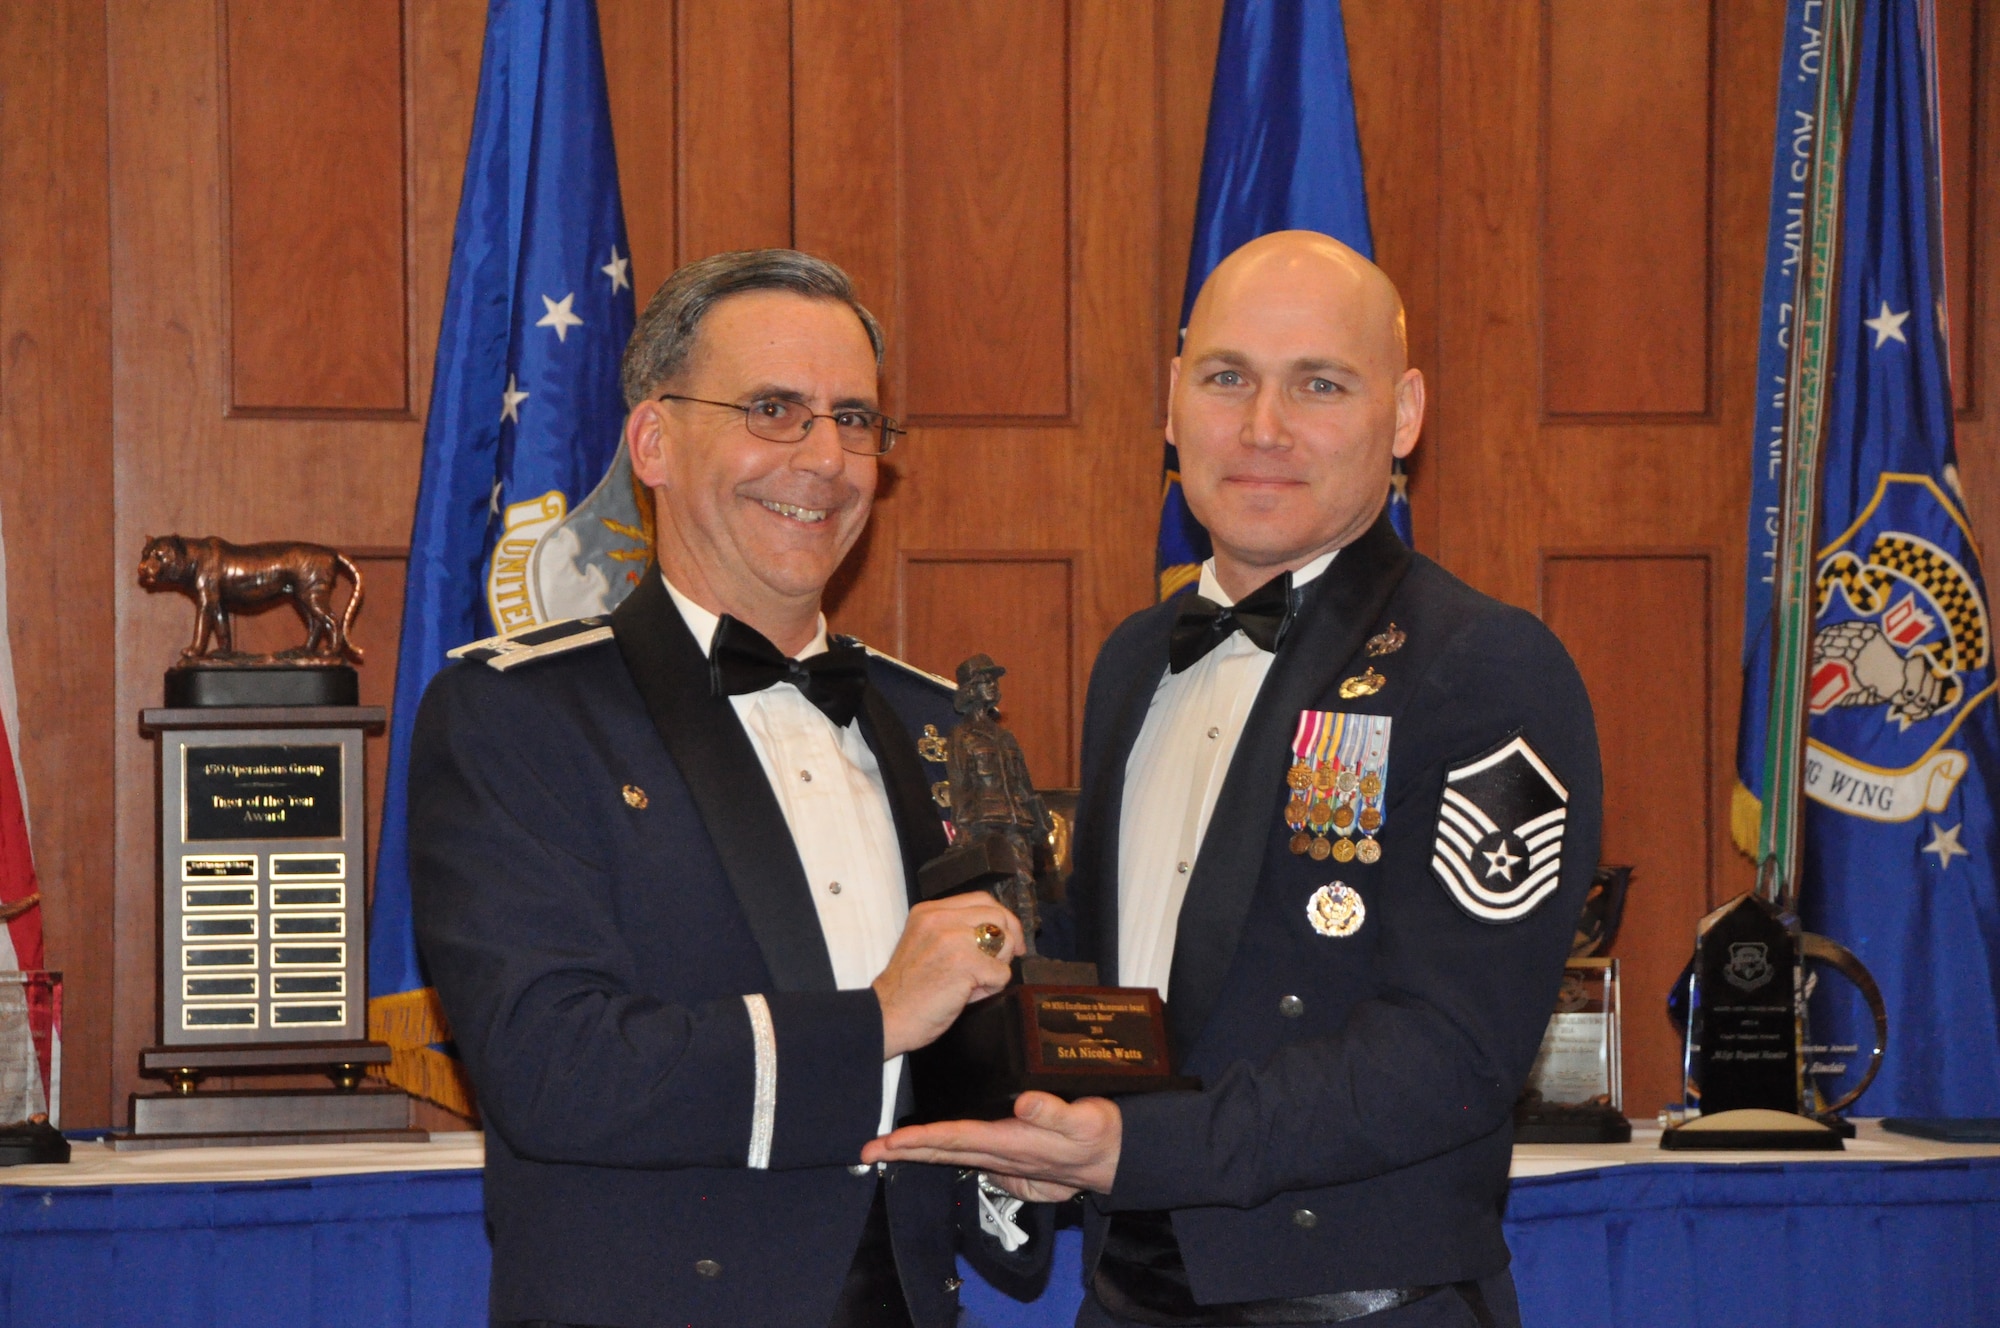 The 459th Maintenance Group commander, Col. Donald Robison, presents the 459 MXG Knuckle Buster Award to Master Sgt. Eugene St. Hillaire, 459th Aircraft Maintenance Squadron, who accepts on behalf of the winner, SrA Nicole Watts, 459th AMXS, at the 459 ARW Annual Awards Banquet on Saturday, March 7, 2015. (Air Force Photo / SrA Kristin Kurtz)
